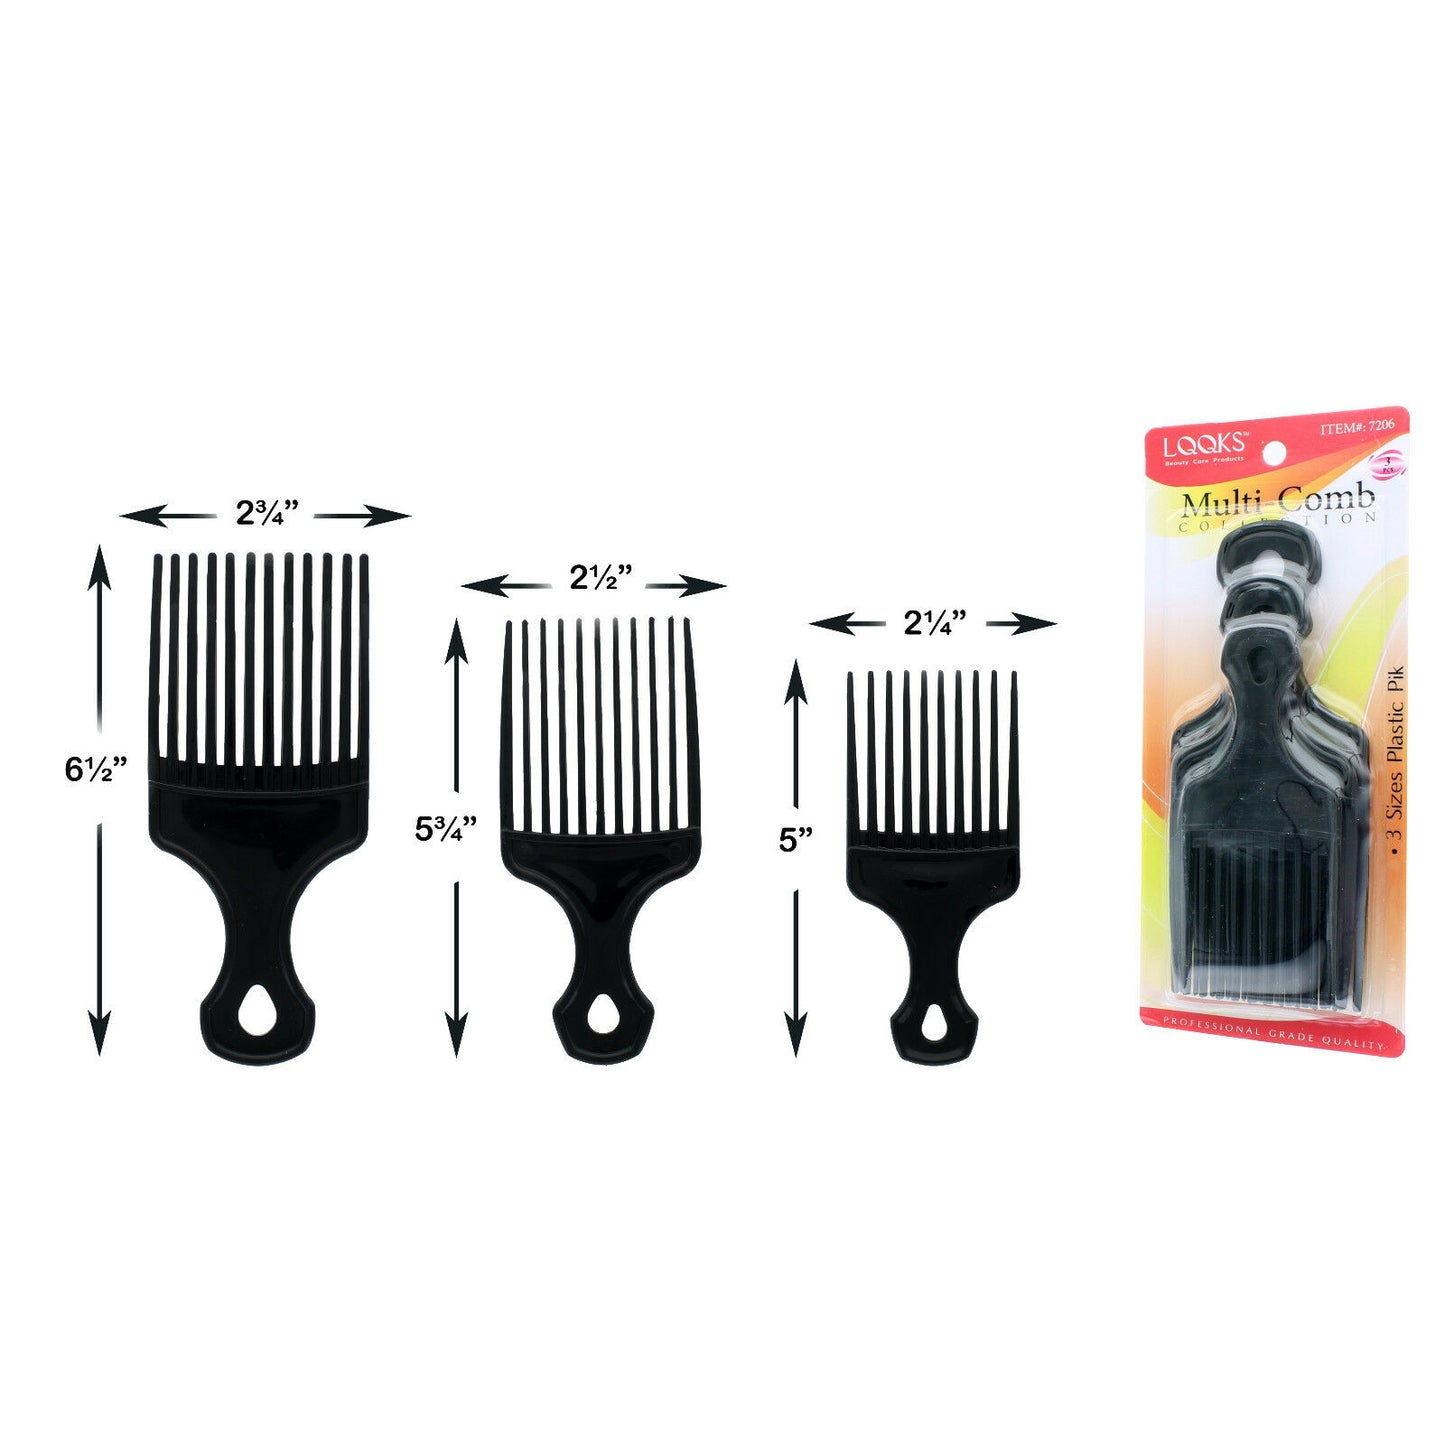 LQQKS Multi-Comb Collection 3 Piece Piks - VIP Extensions